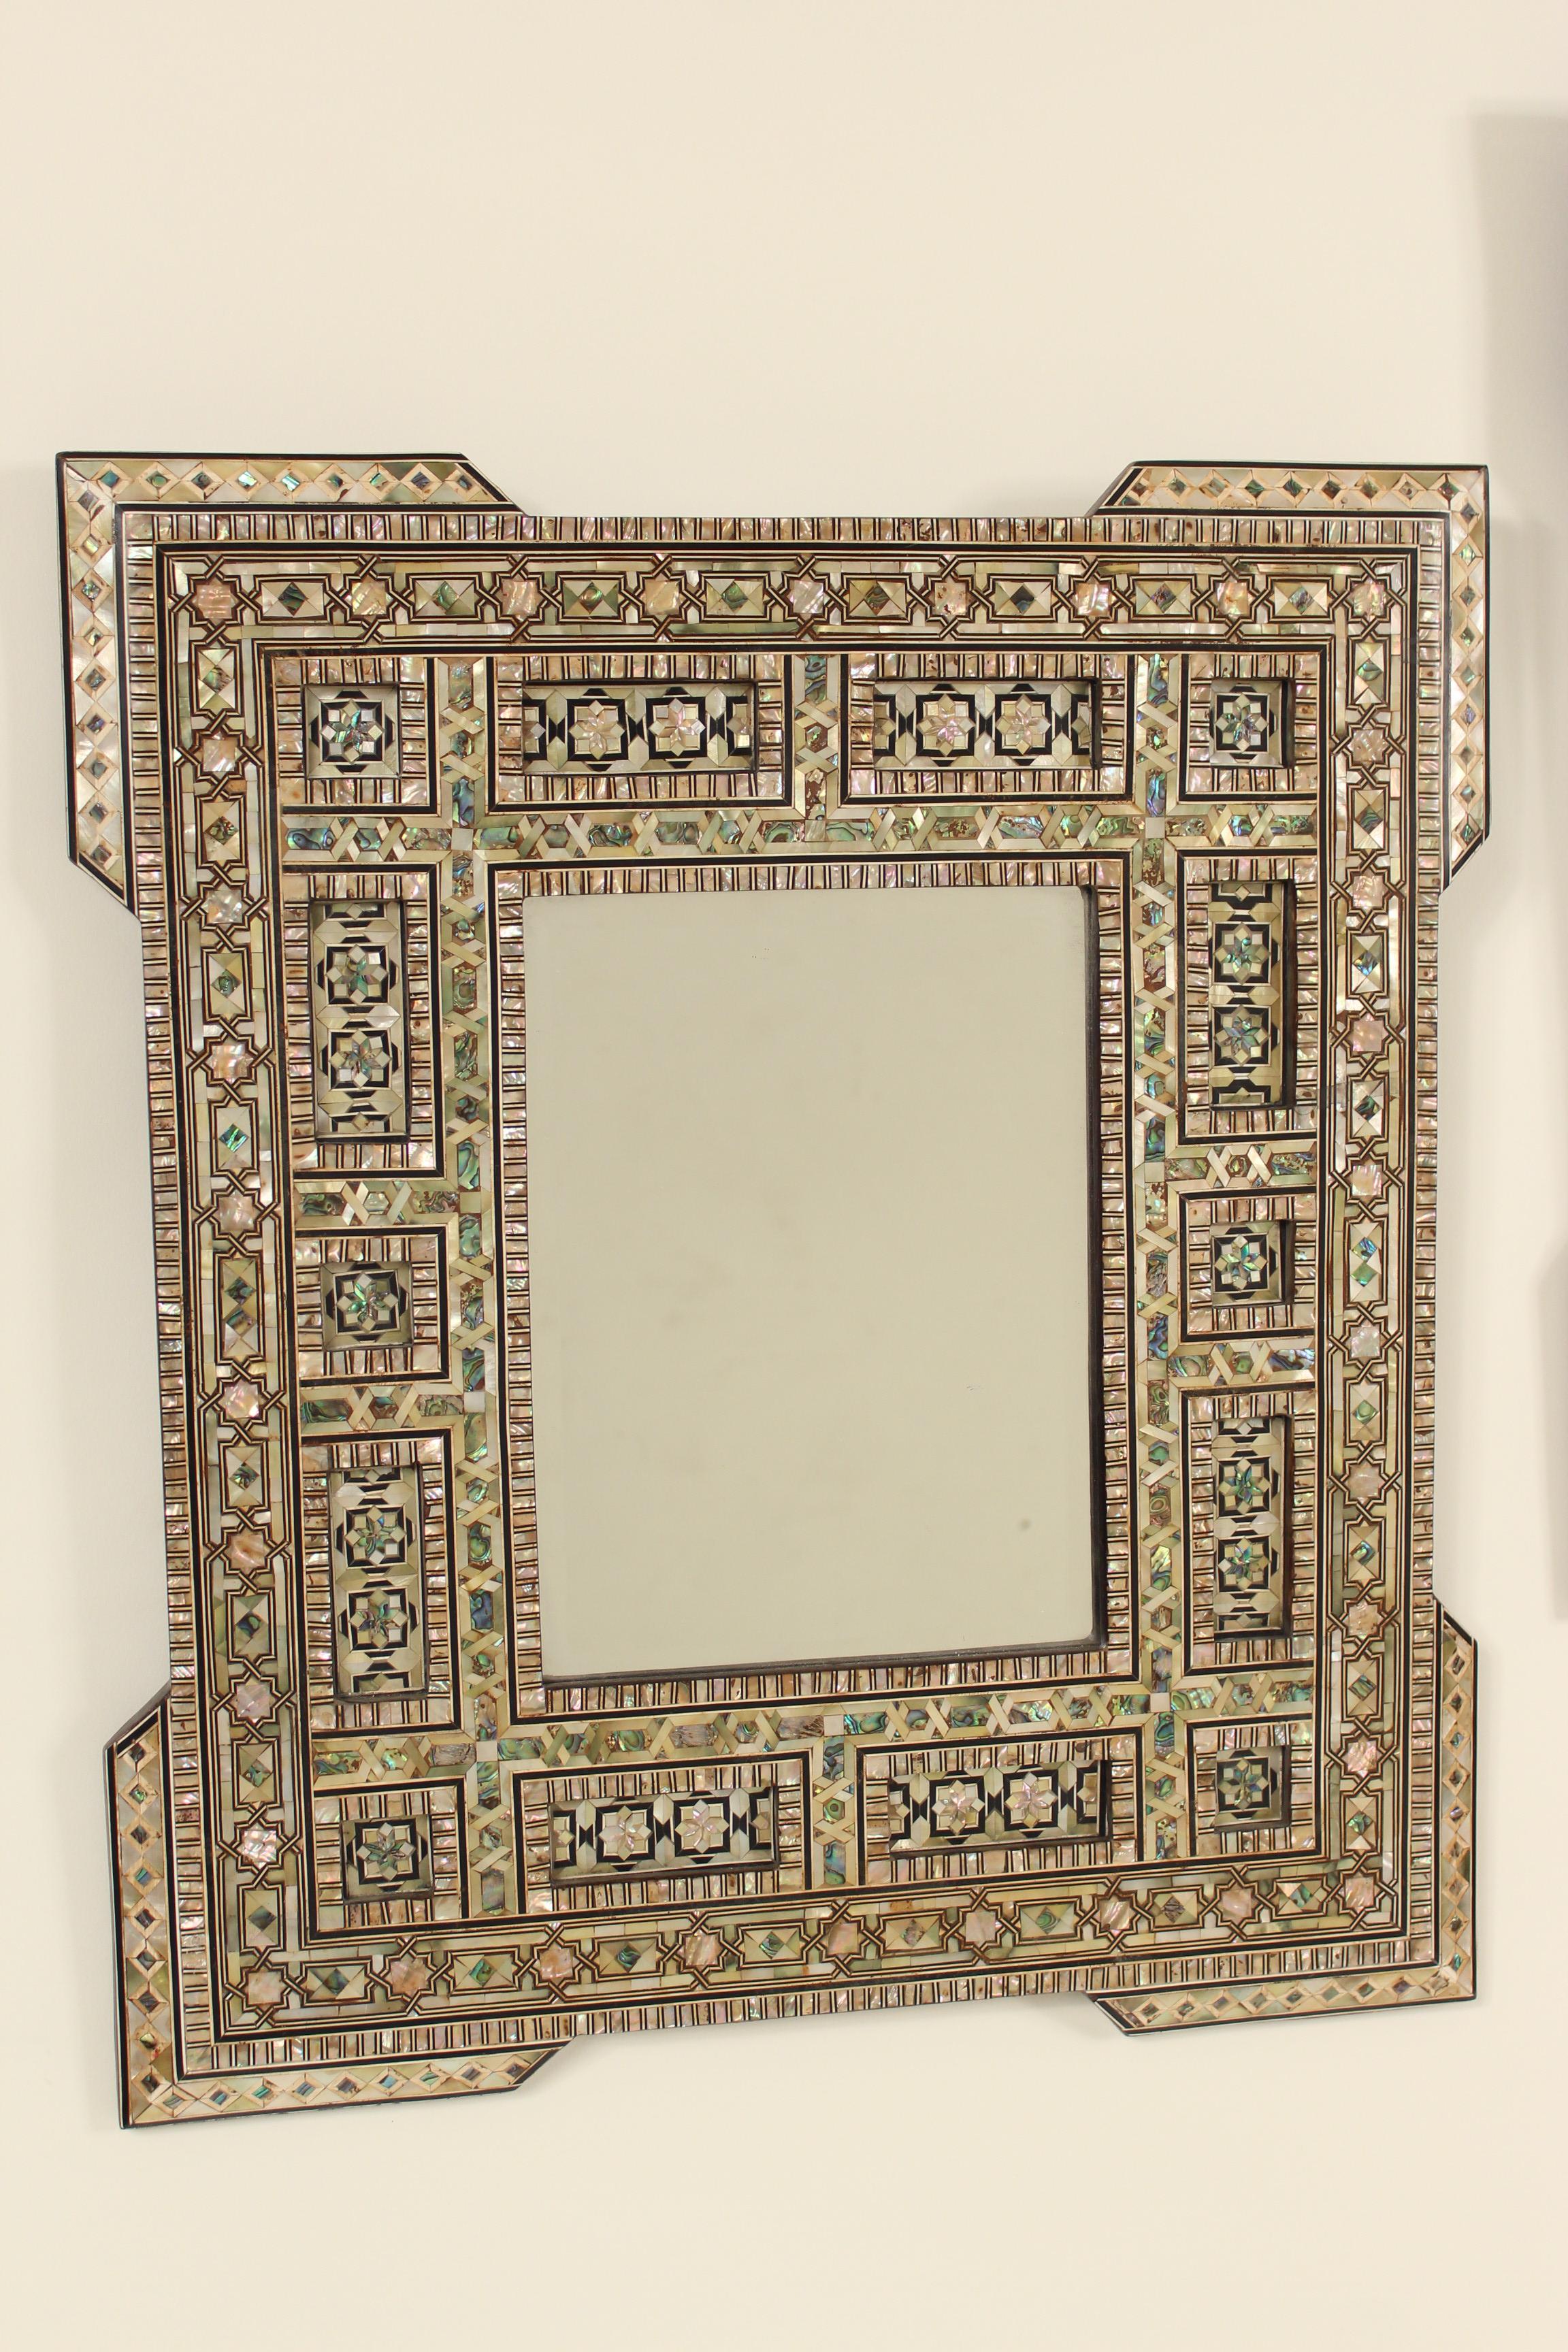 Pair of Middle Eastern mother of pearl inlaid mirrors, early 21st century.